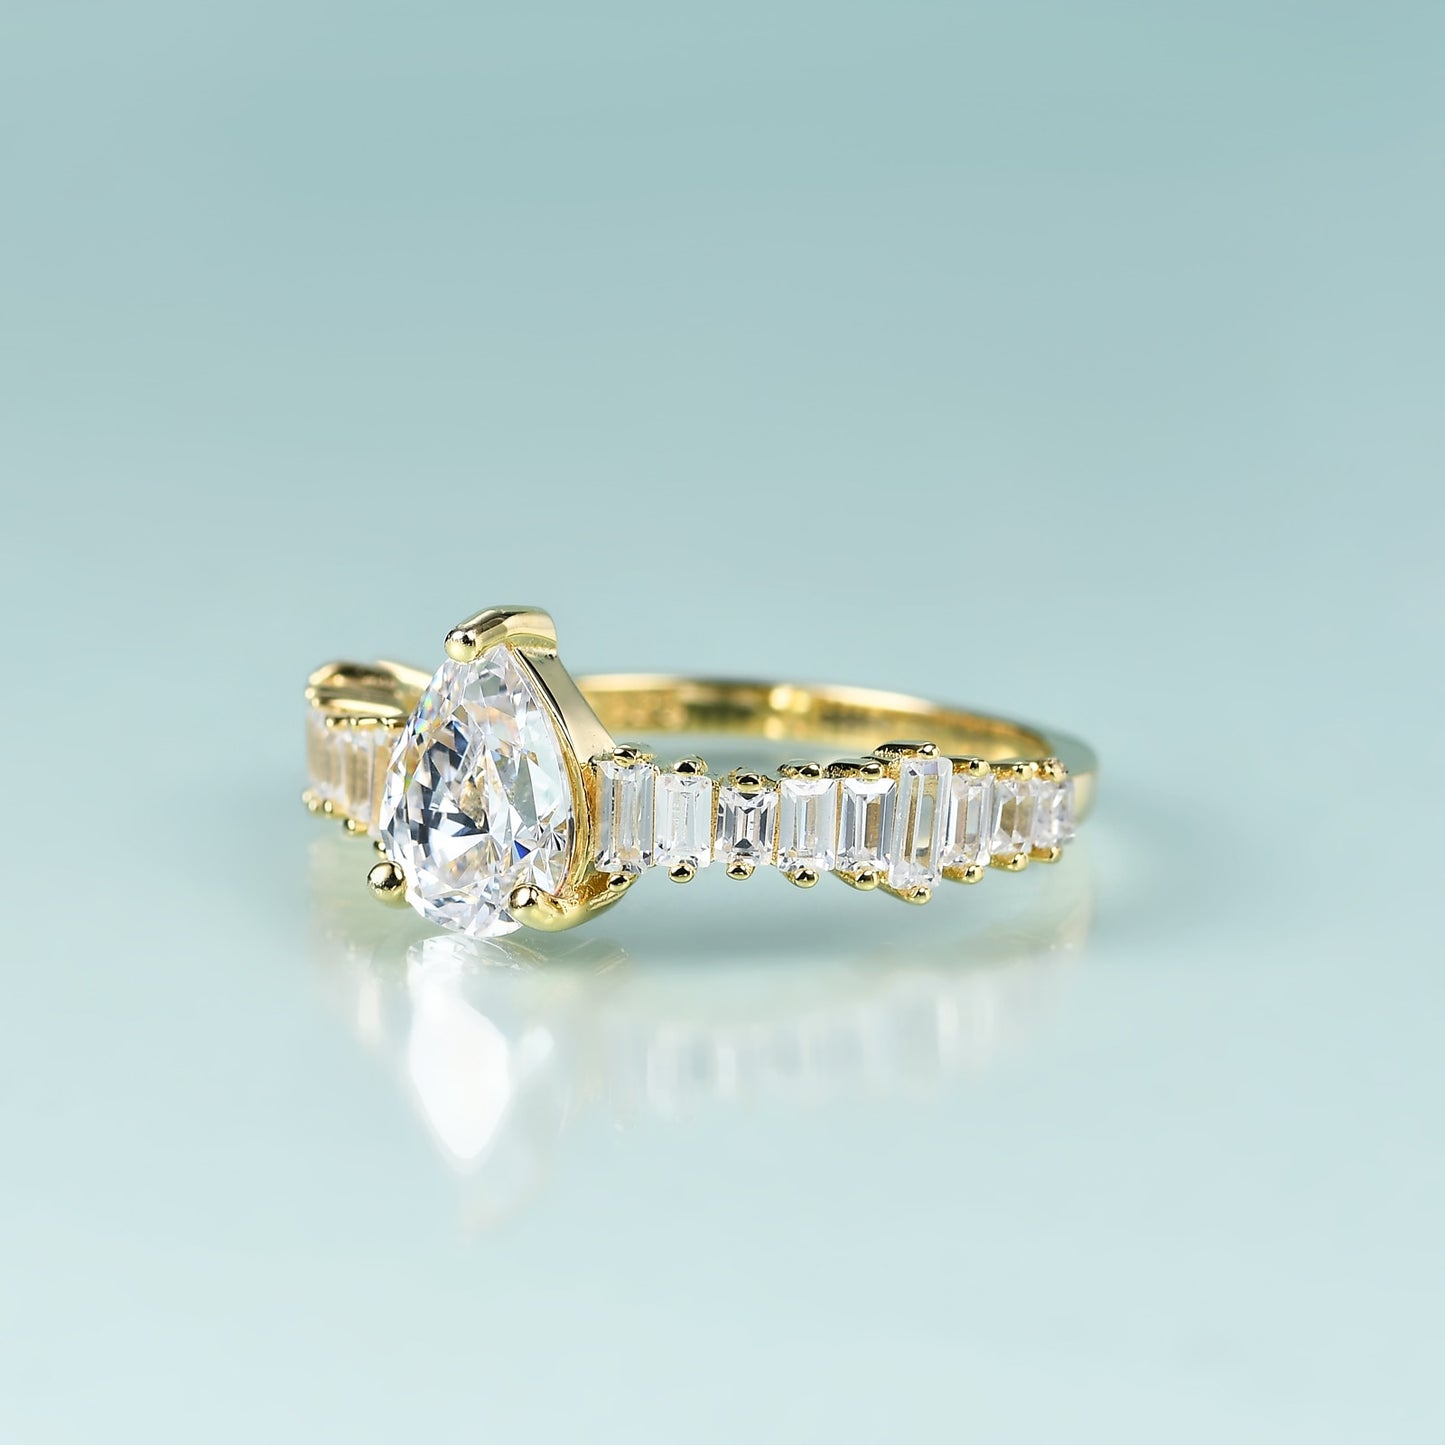 A gold ring with a tear drop shape moissanite on a band of varying side emerald cut gems set horizontally.